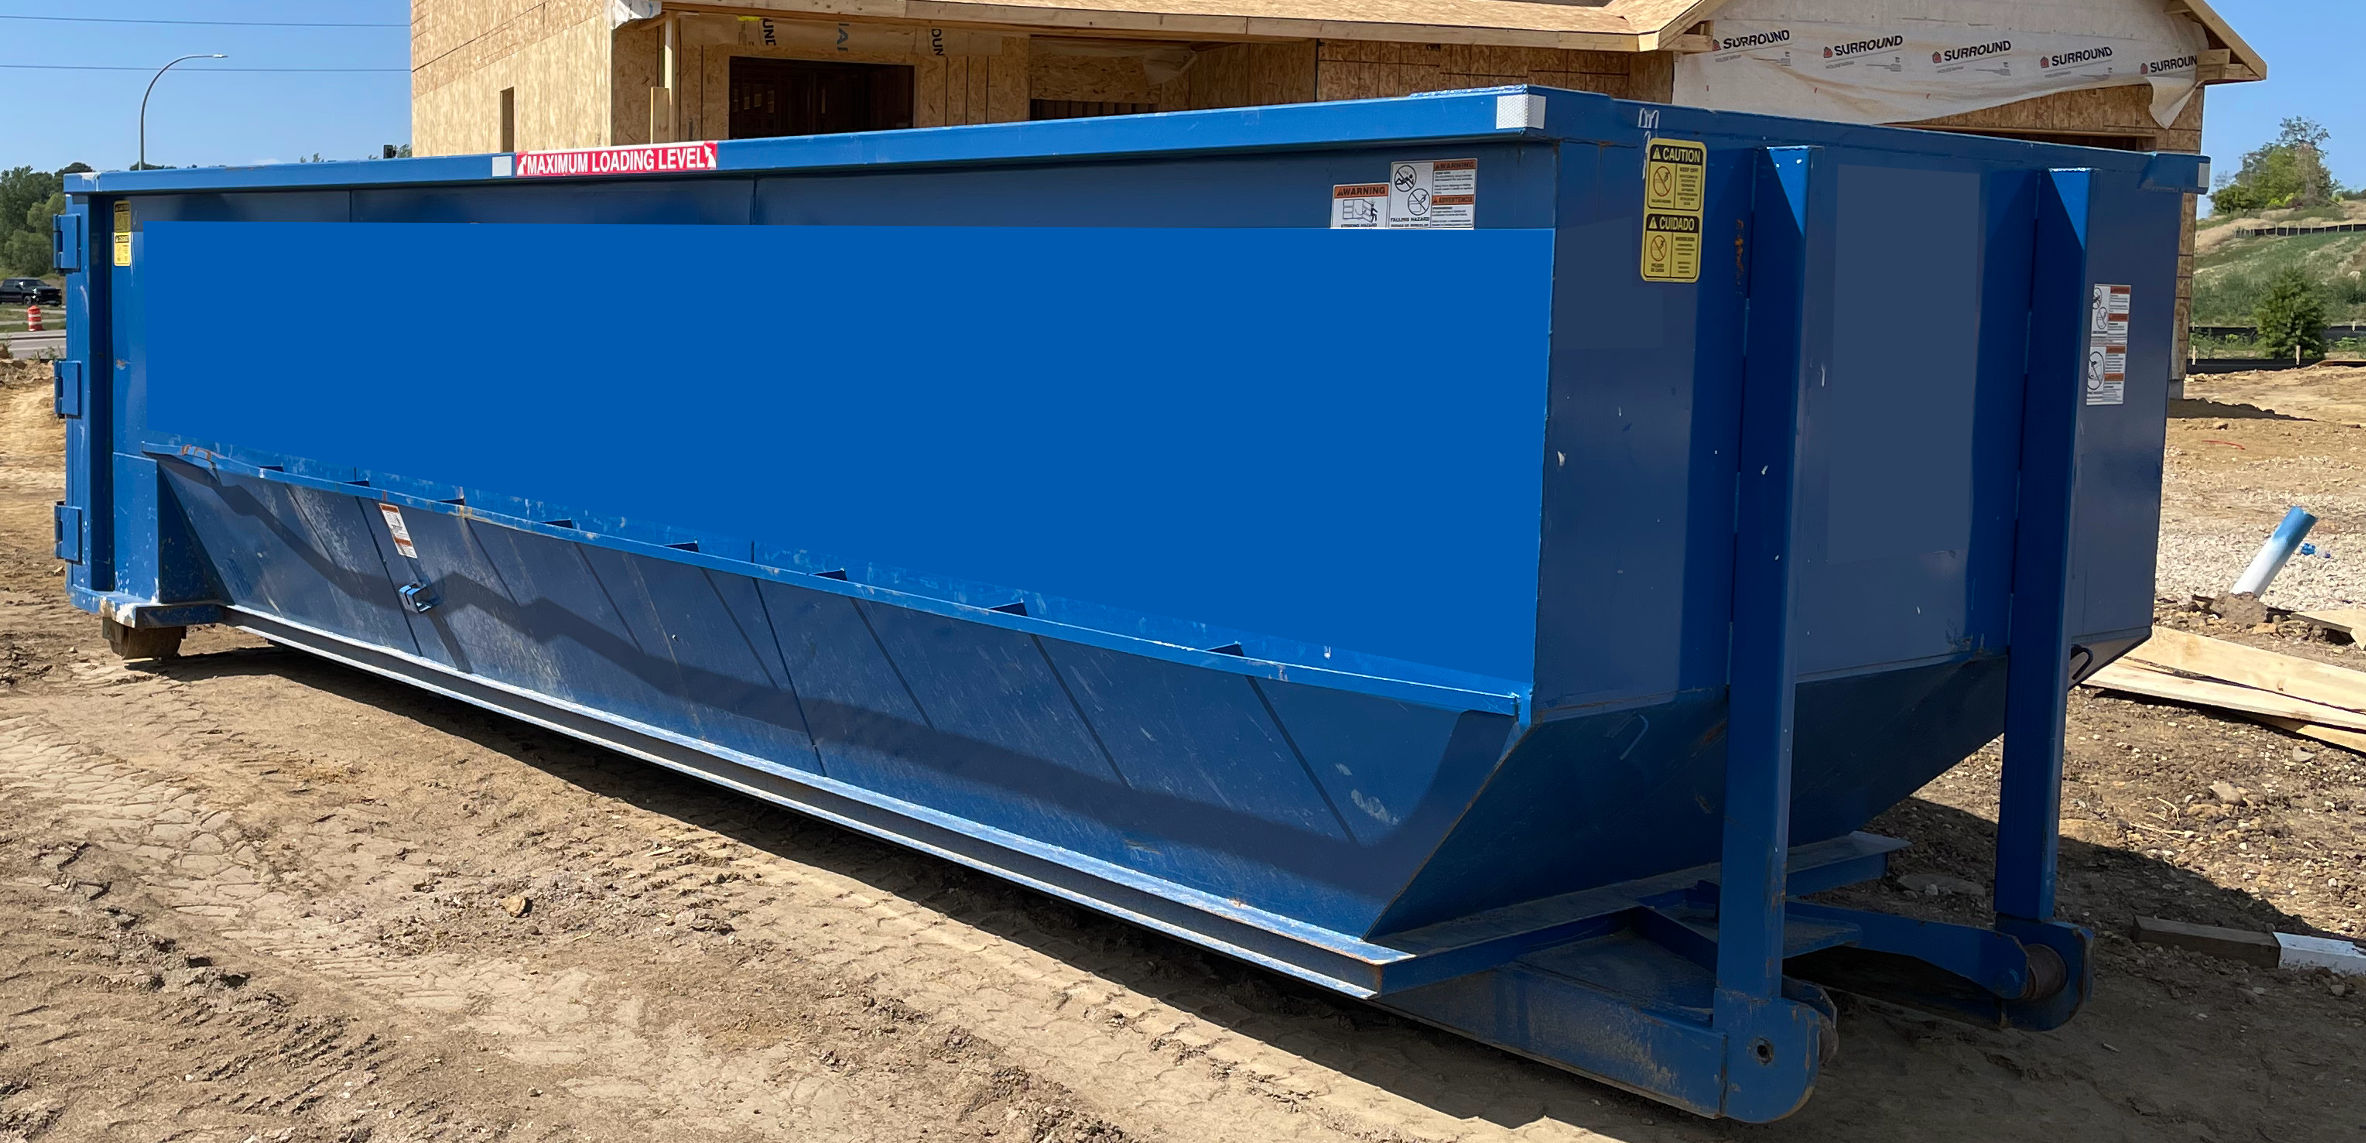 This is one of our blue dumpster at a new home construction site